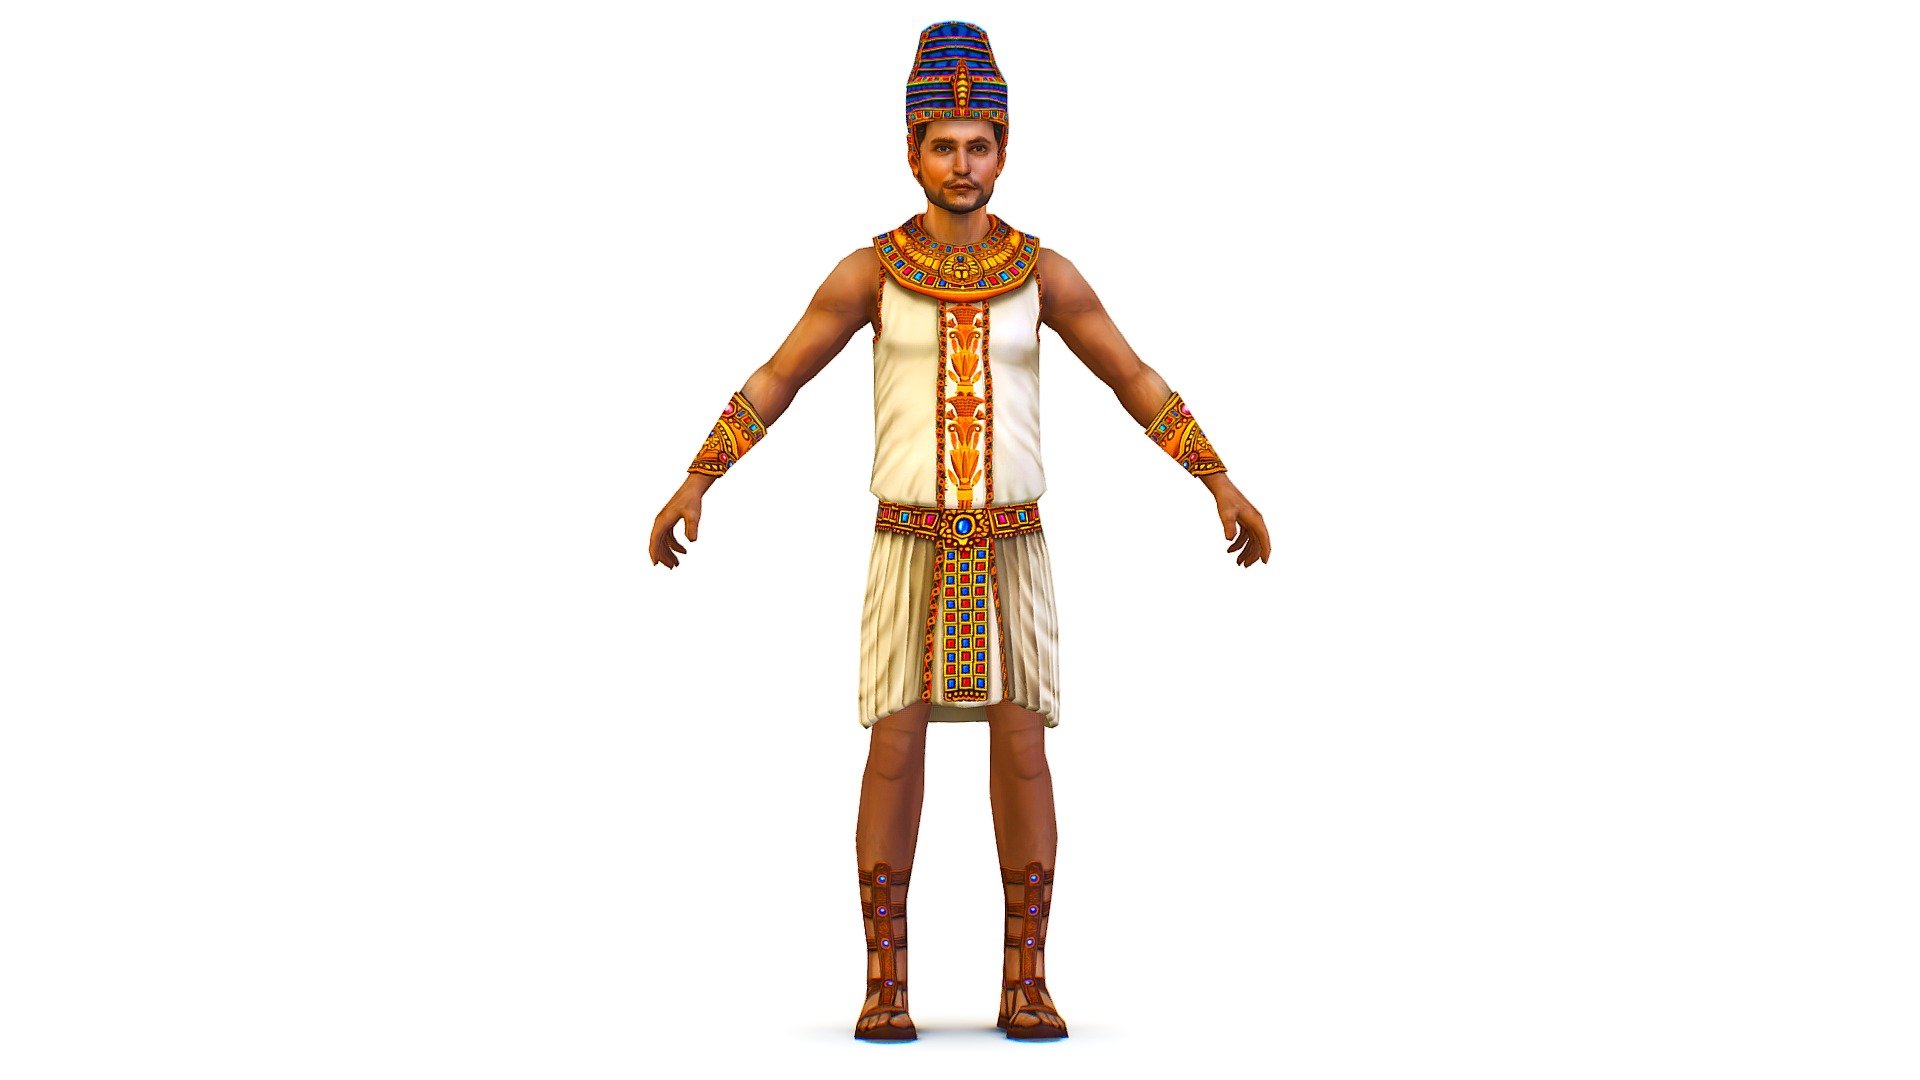 1 color textures 4096x4096

2100 poly count


3dsMax / Maya file included




Support me on Patreon, please - https://www.patreon.com/art_book


 - a Young Man Dressed as an Egyptian Pharaoh - Buy Royalty Free 3D model by Oleg Shuldiakov (@olegshuldiakov) 3d model